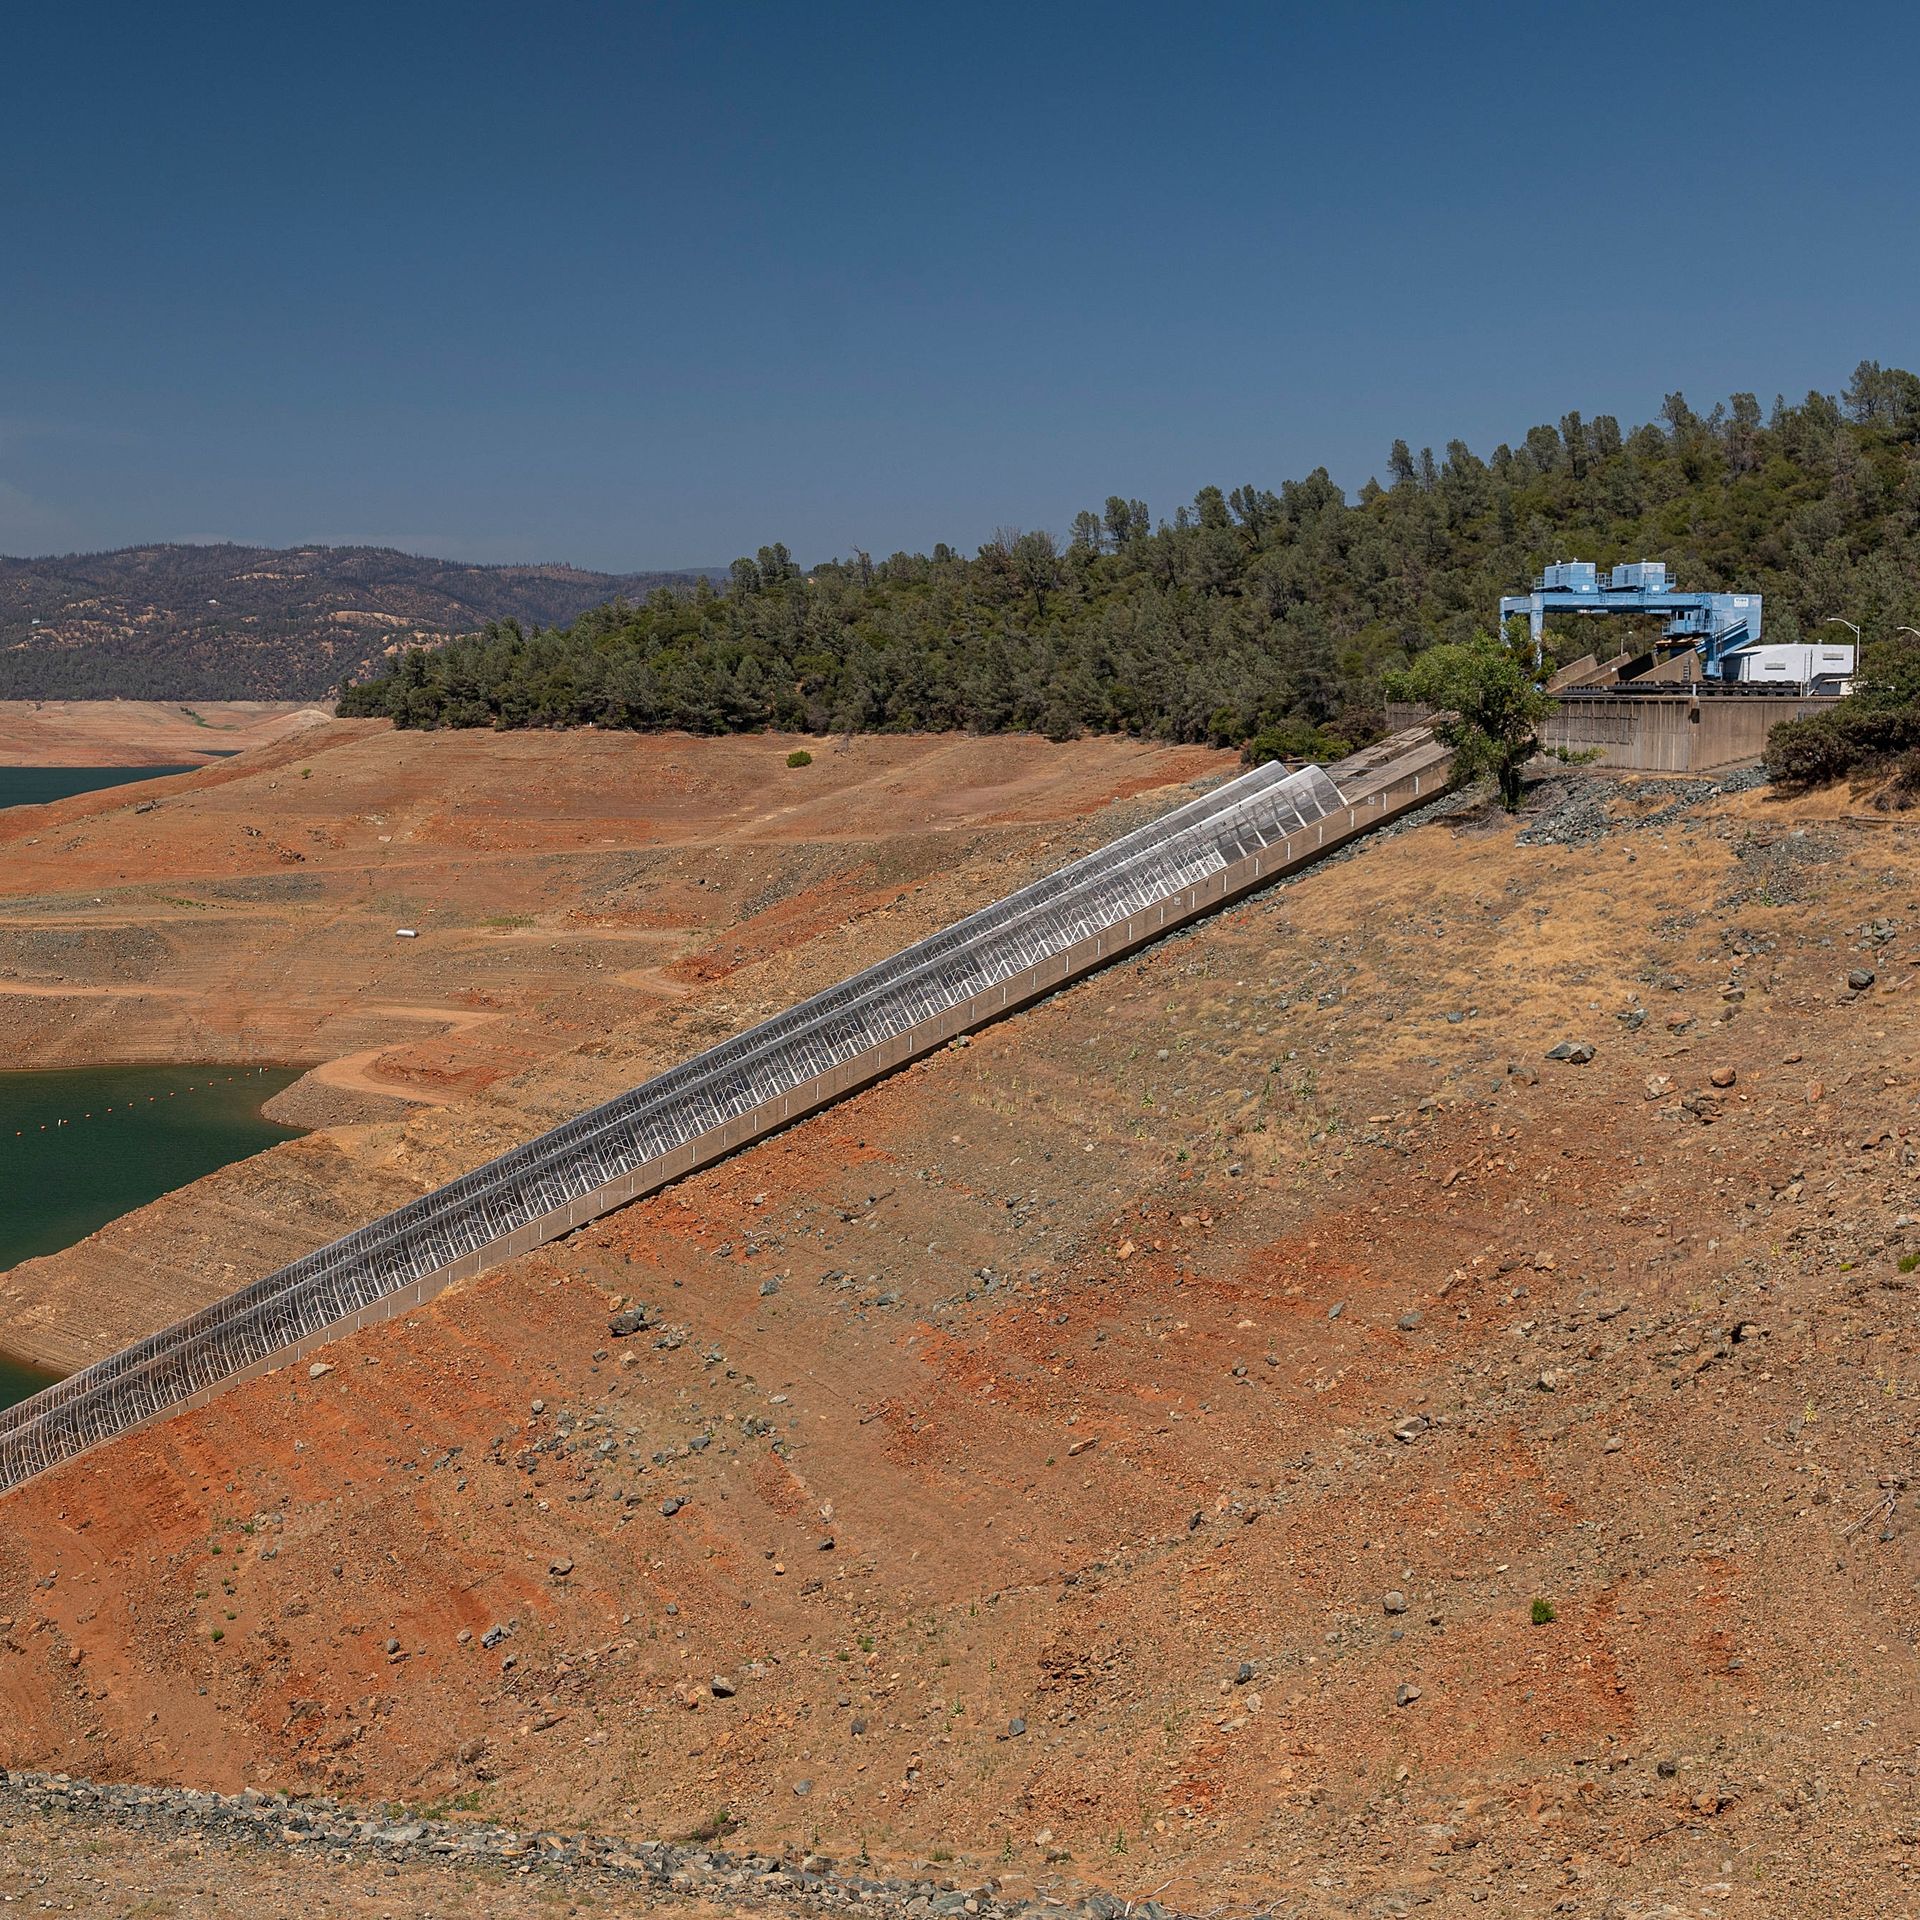 Penstock intakes for the Hyatt Powerplant at Lake Oroville during a drought in Oroville, California, U.S., on Thursday, July 15, 2021.